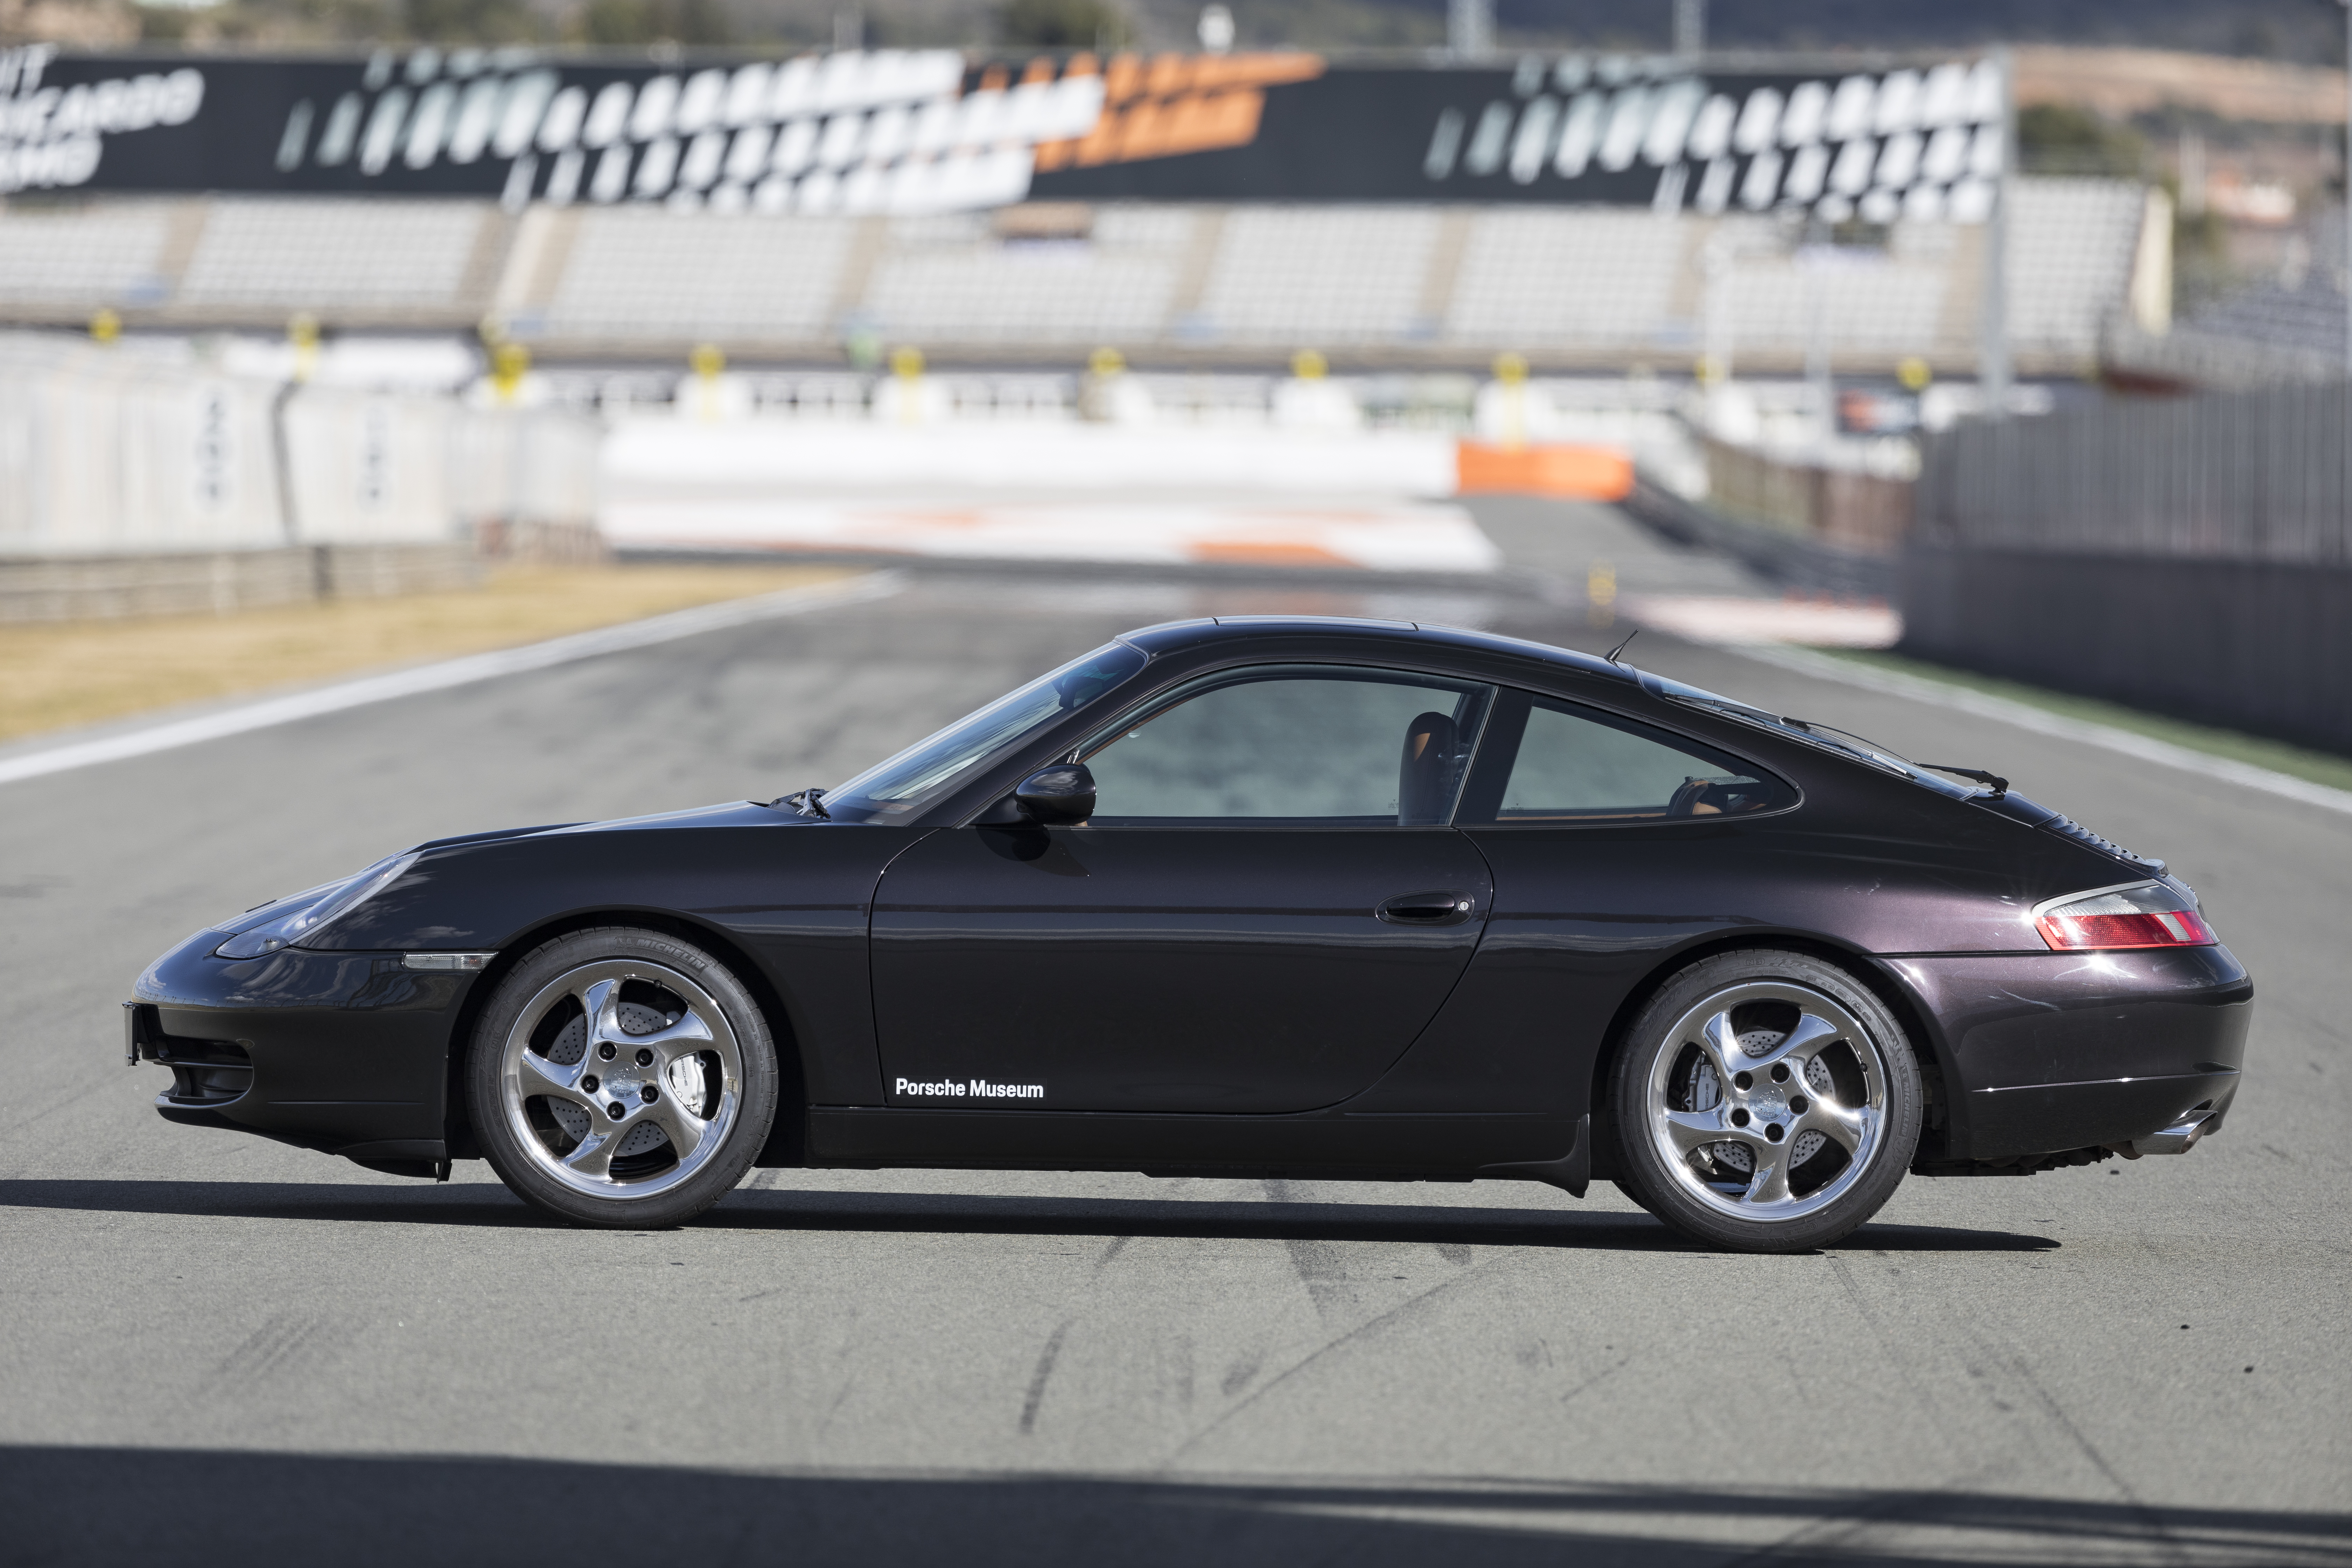 Side view of black Porsche 911 (996) parked on racetrack